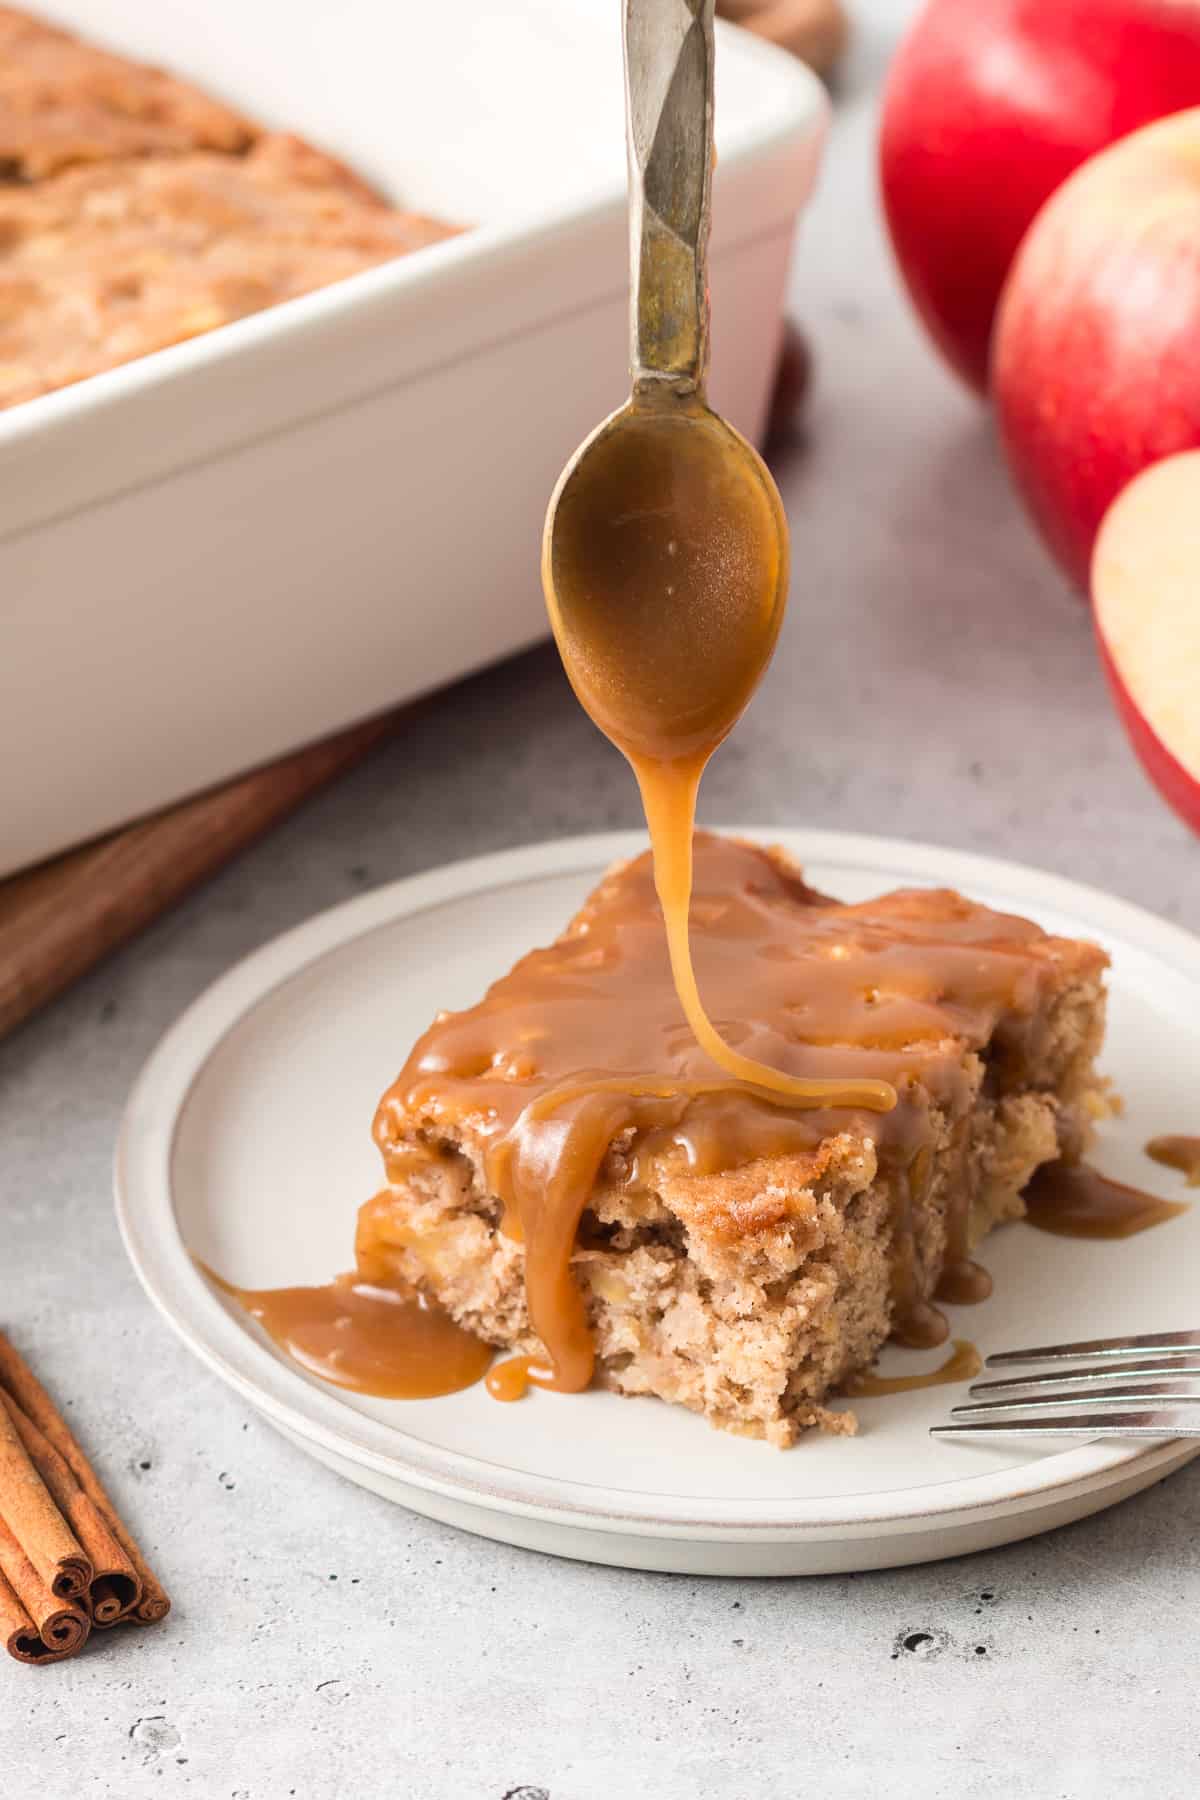 Butterscotch sauce drizzling off the end of a spoon and on to a slice of apple cake on a plate.